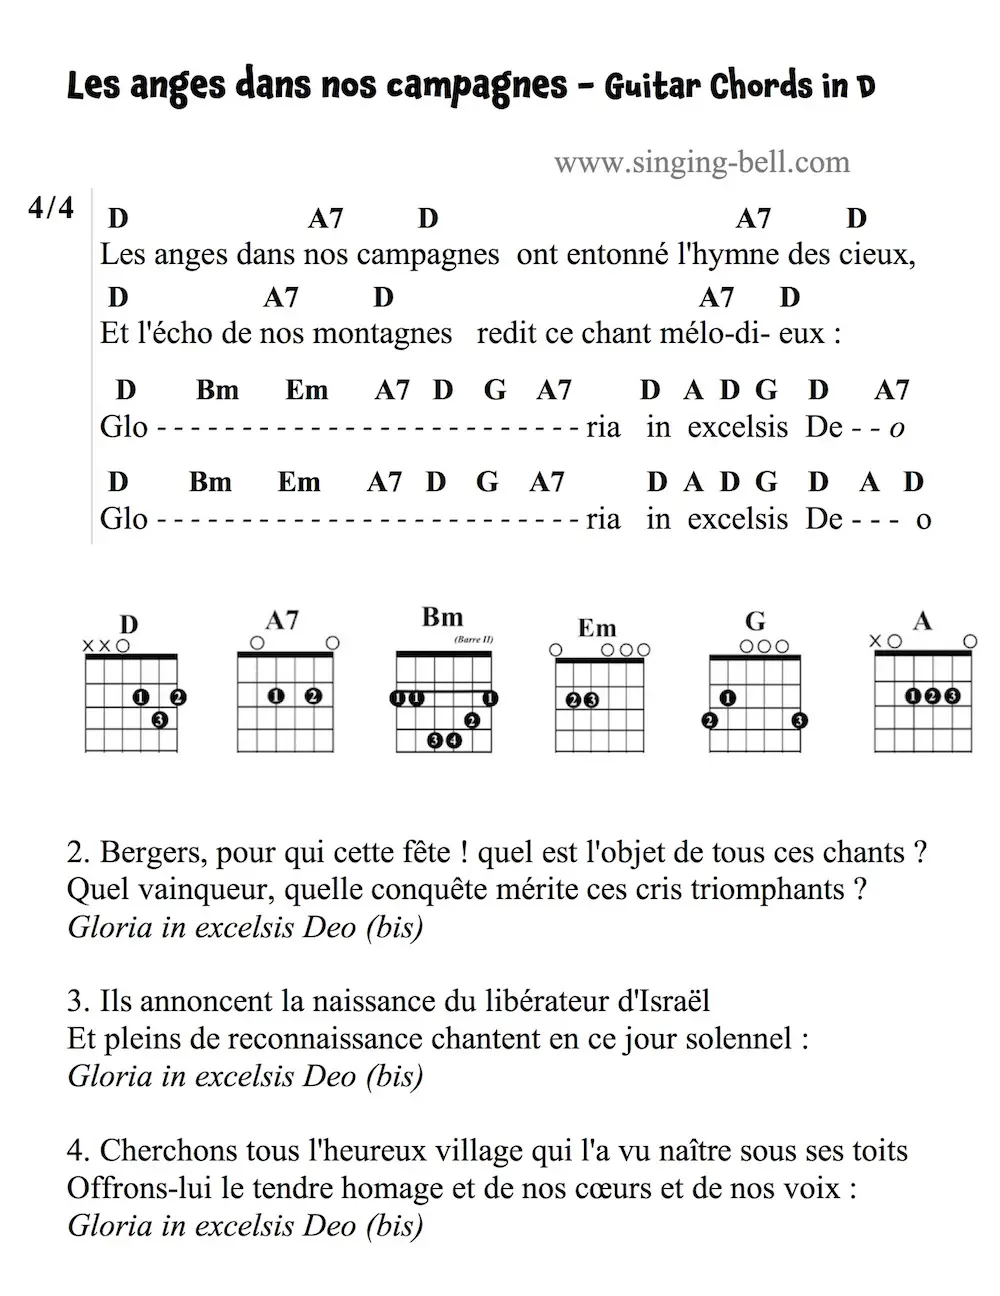 Les Anges dans nos campagnes Guitar Chords and Tabs in D.